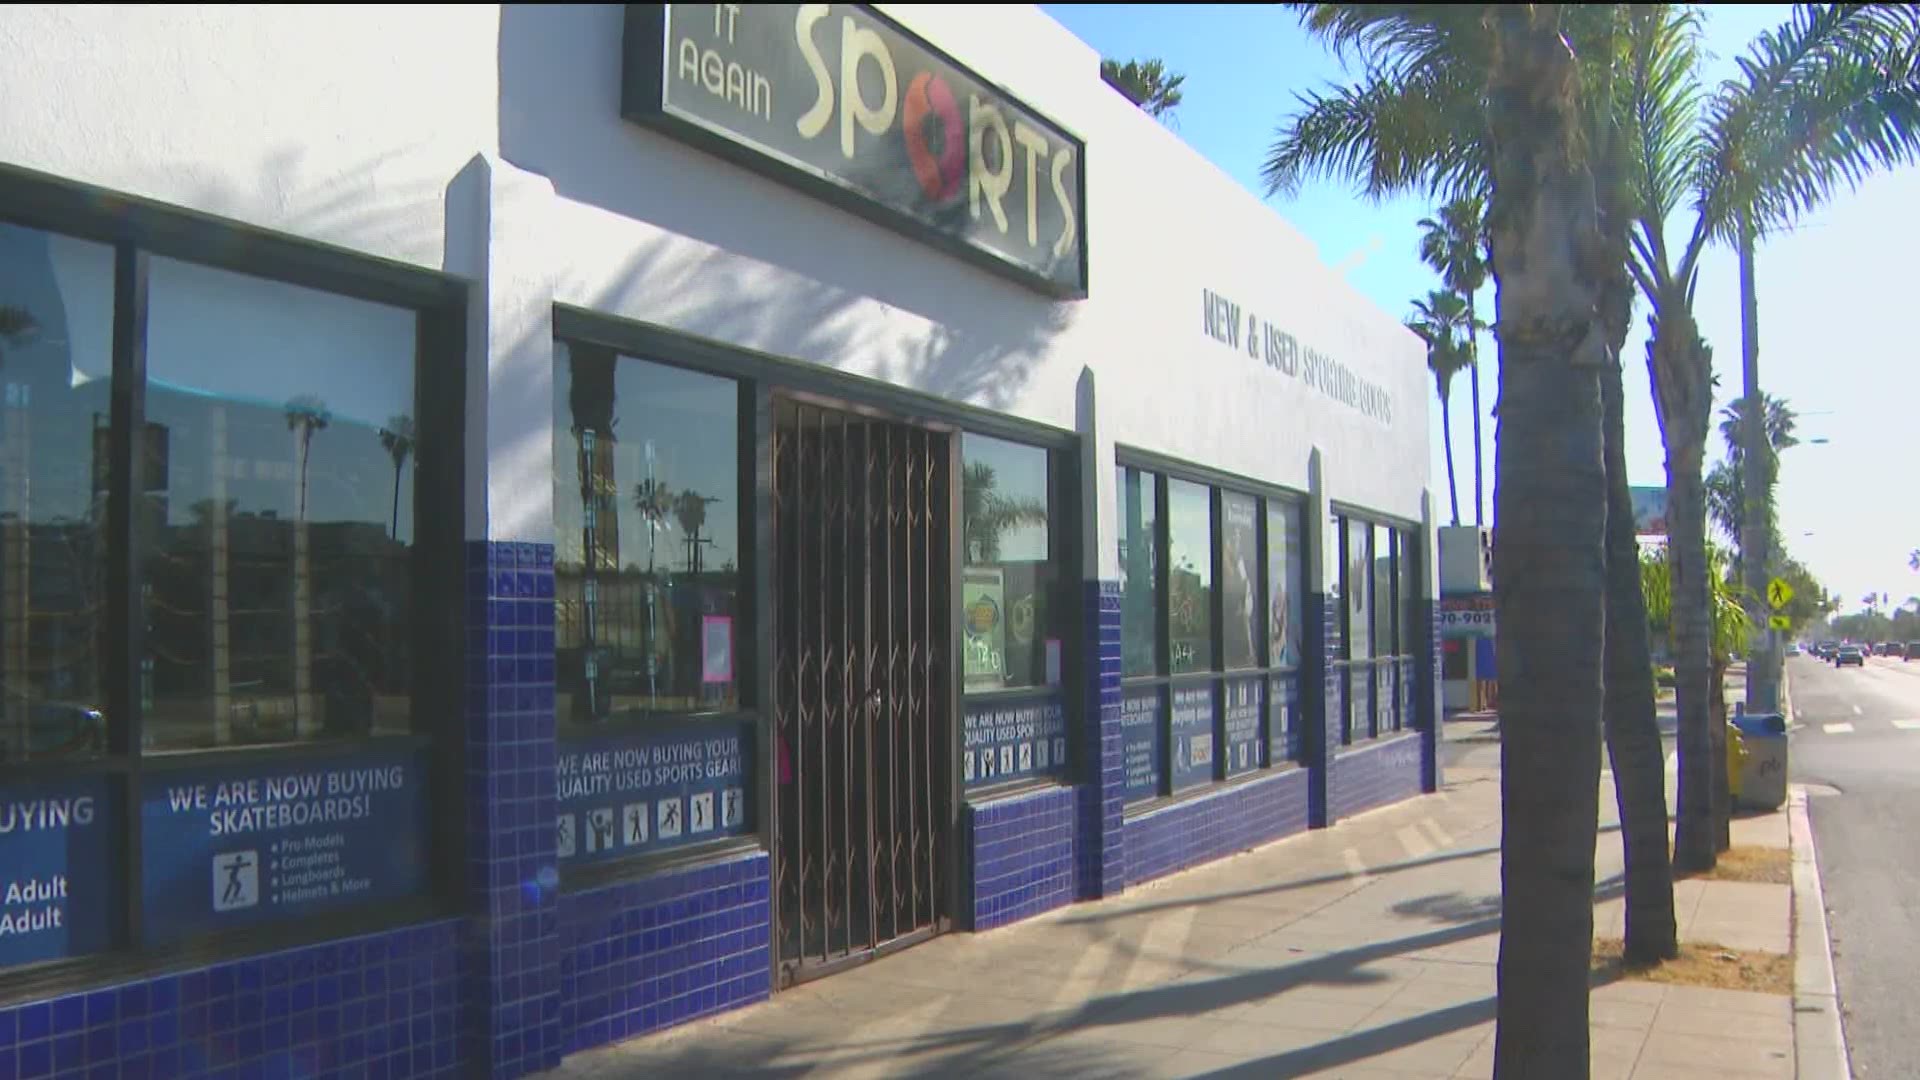 News 8's Brandon Lewis reports how some business owners are confused about the guidelines for reopening their doors.